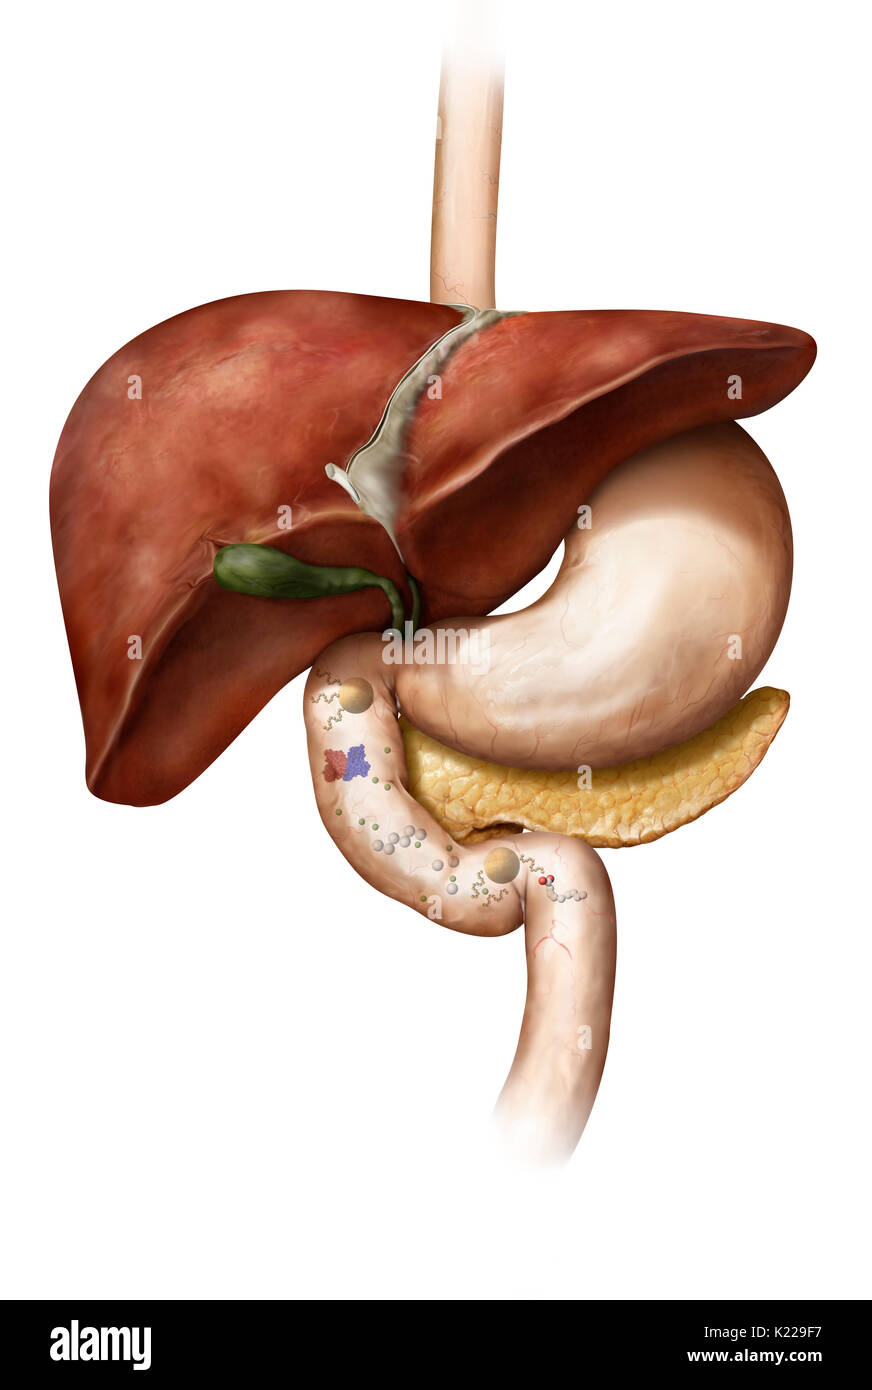 Metabolism is the collection of biochemical reactions that occur in the cells and ensure the functioning of the body. It uses the nutrients provided during digestion and the oxygen supplied by respiration. Stock Photo